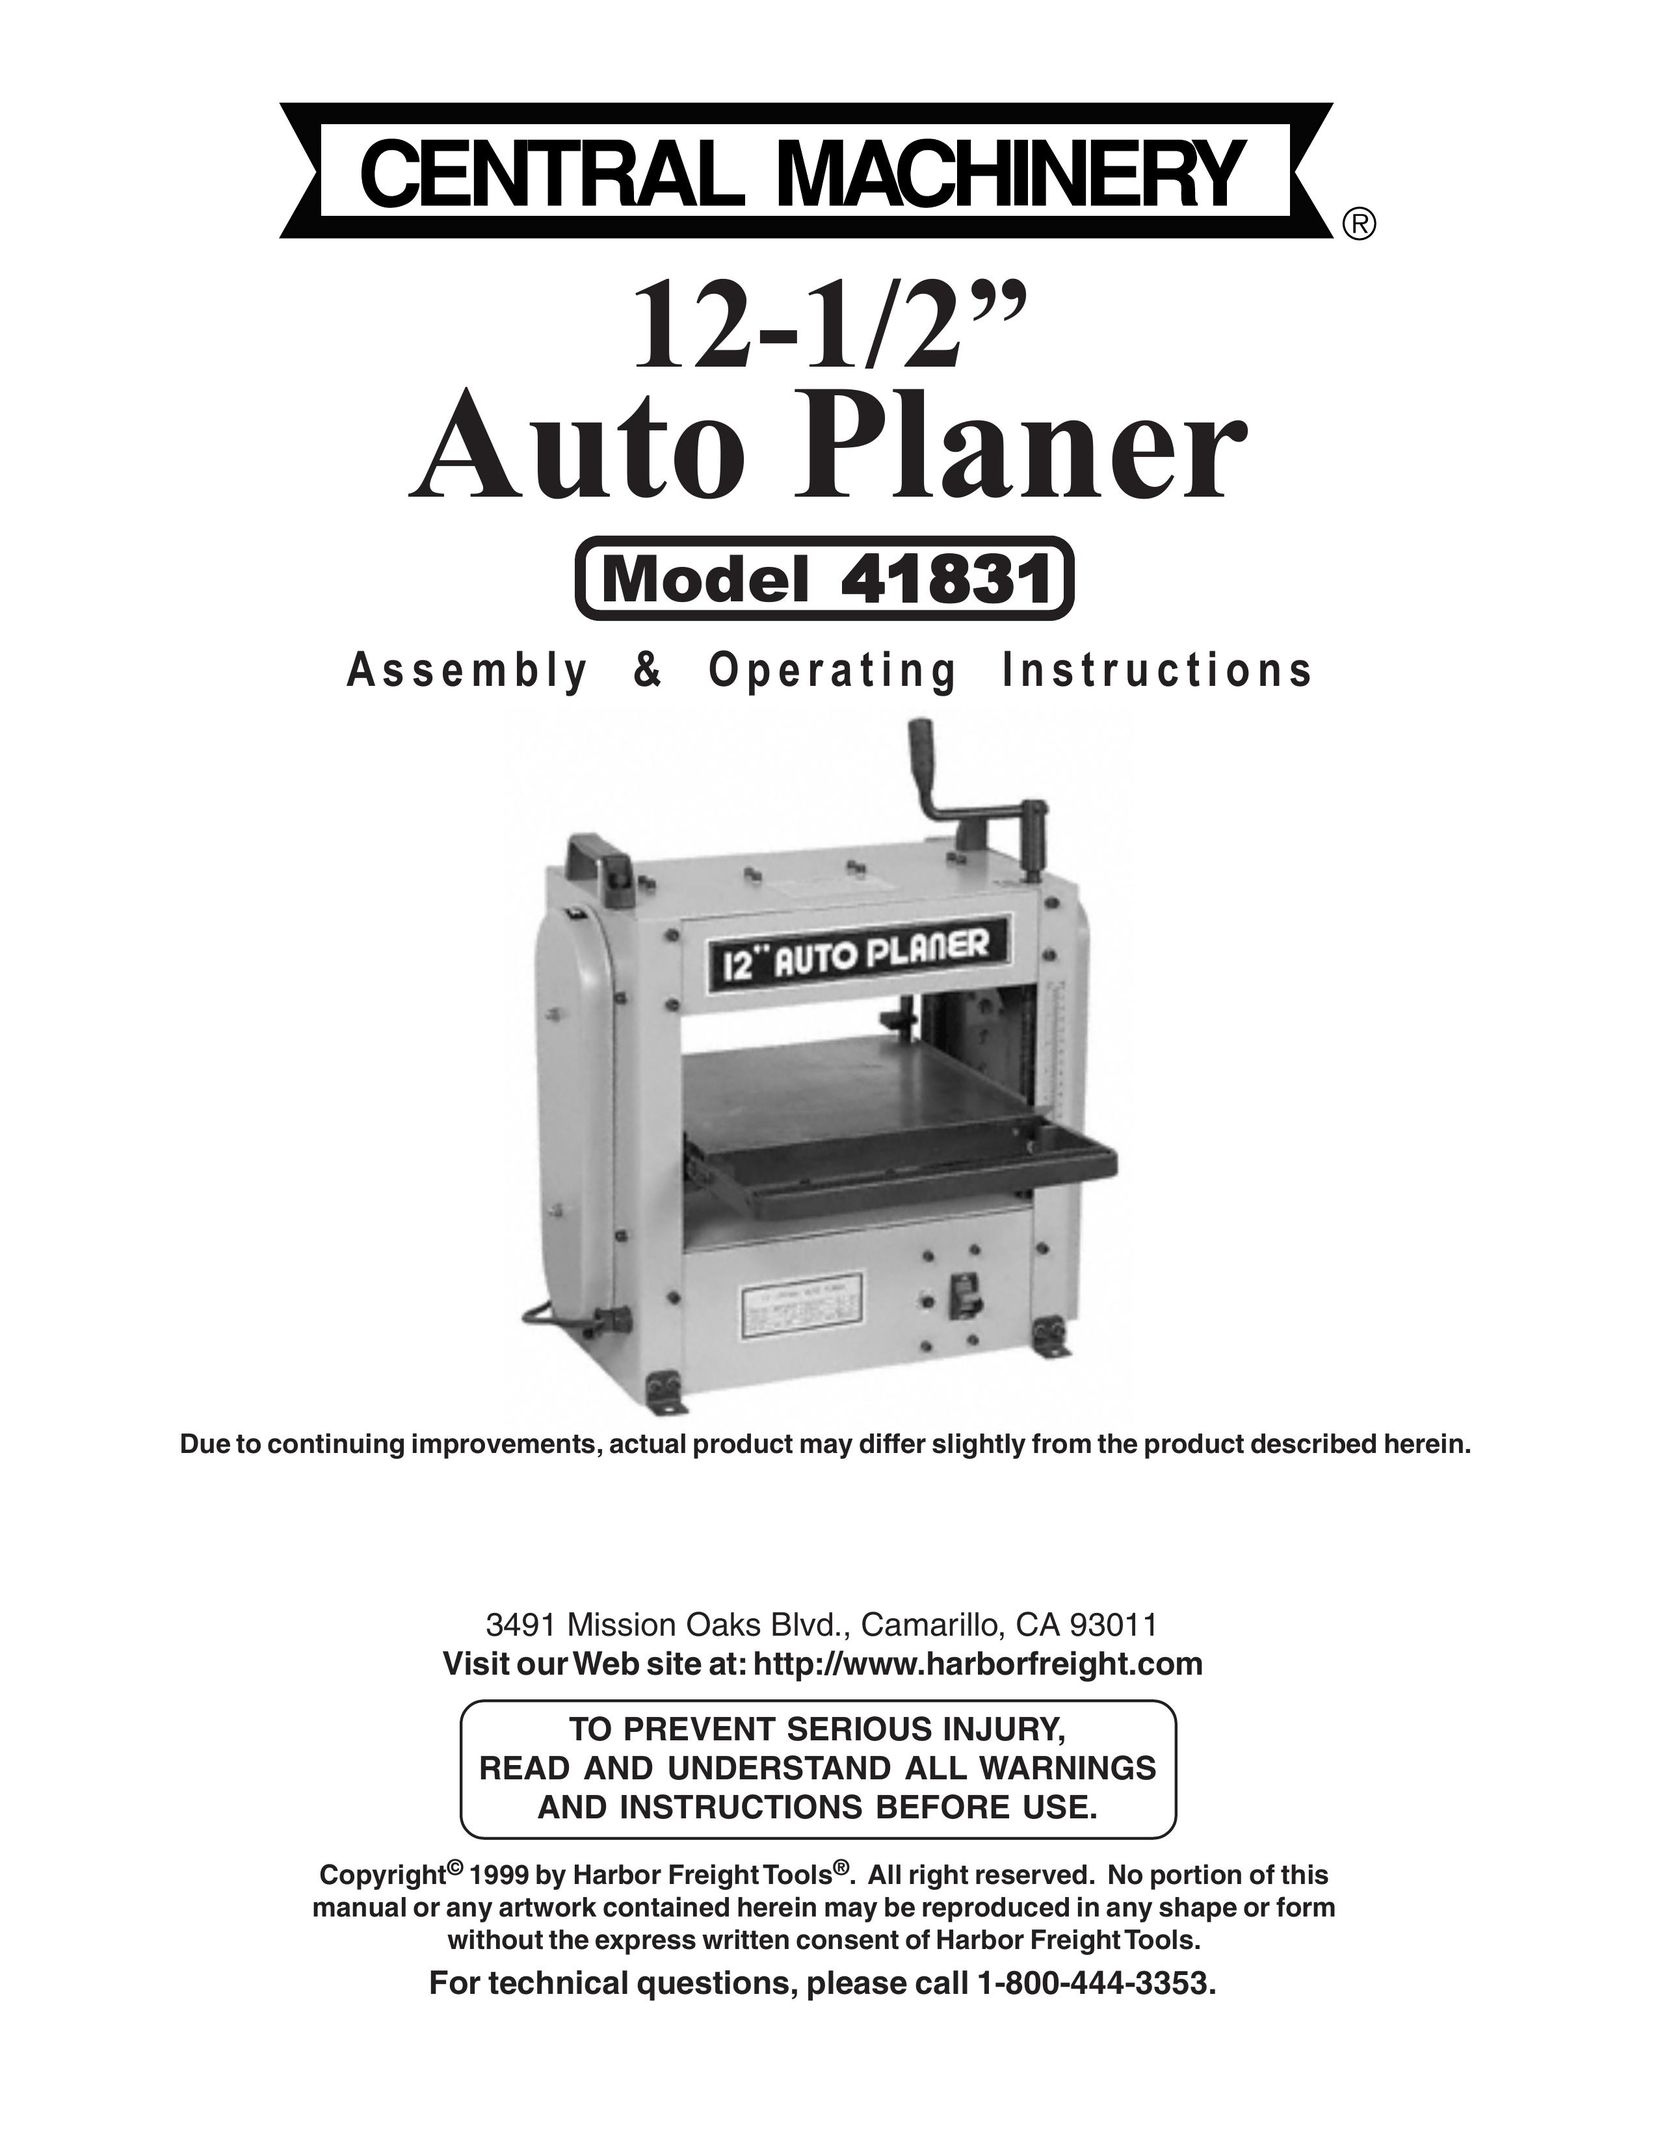 Harbor Freight Tools 41831 Planer User Manual